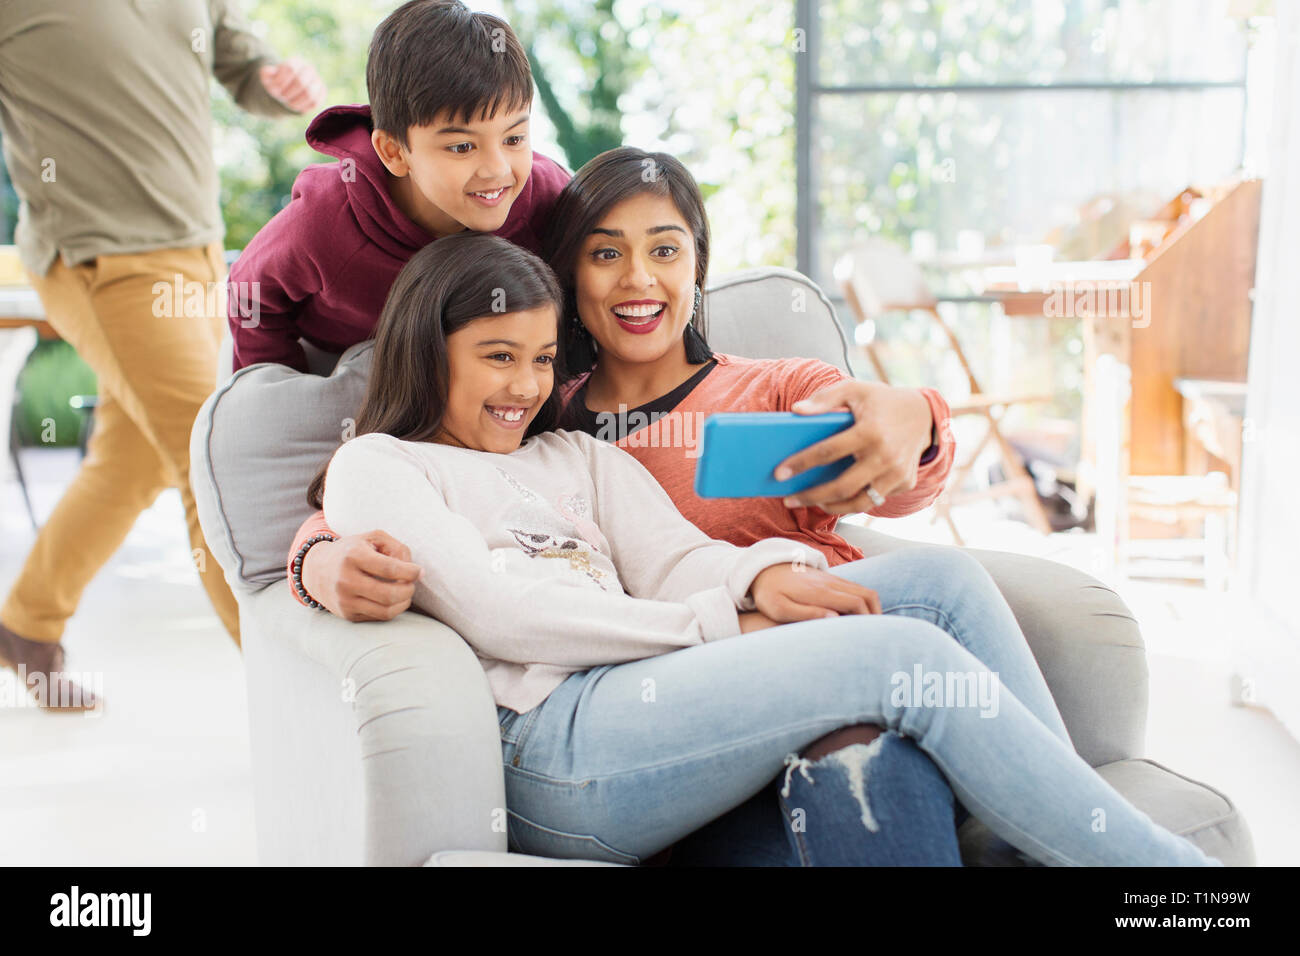 Mother and children taking selfie with camera phone Stock Photo